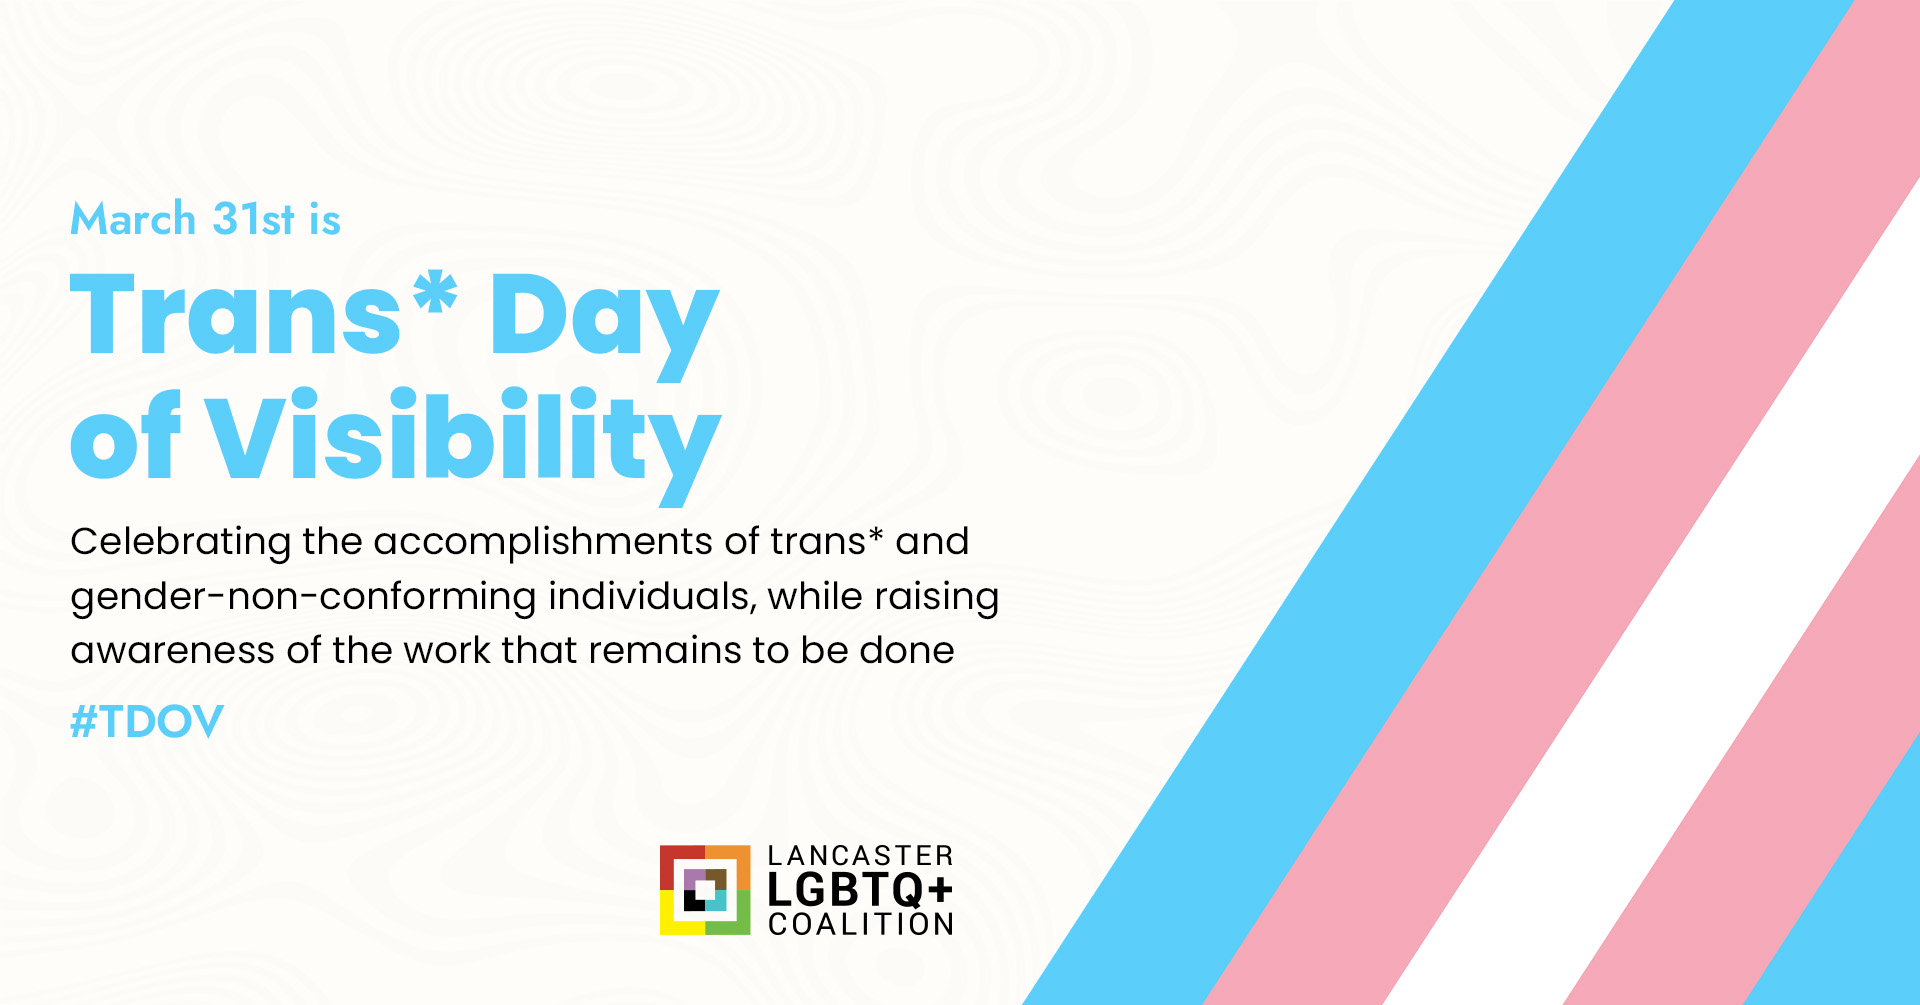 Join us for a Trans Day of Visibility Celebration on March 31st!